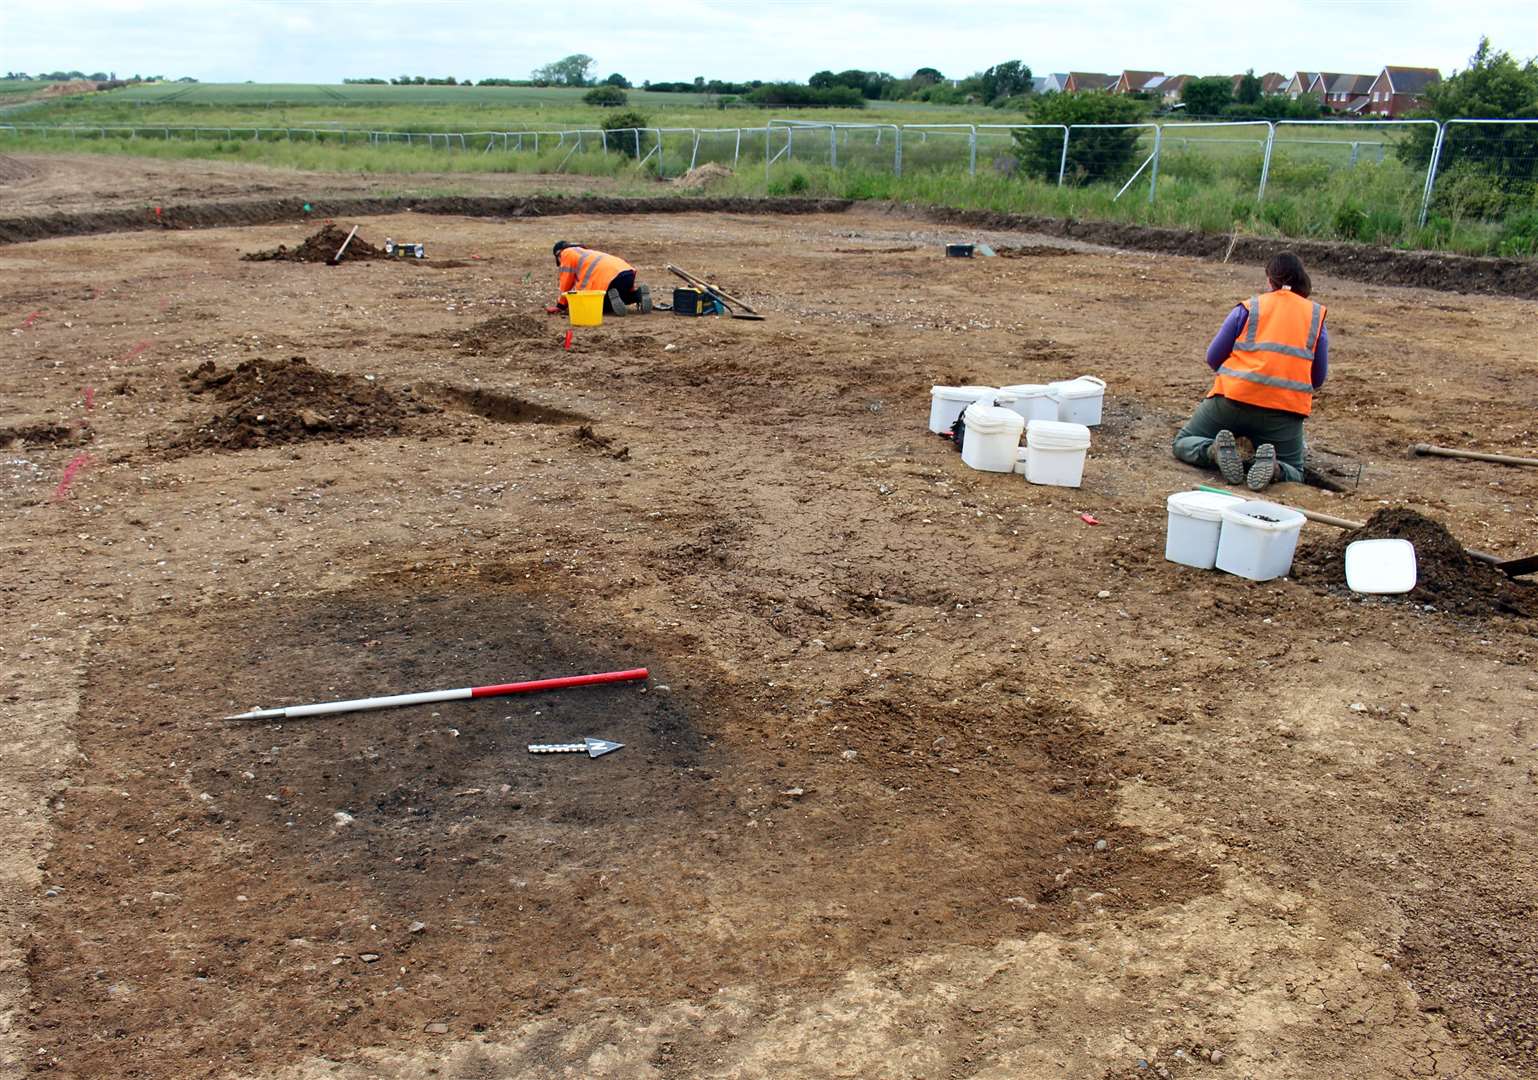 Cotswold Archaeology's field team, excavating at the Hillborough site. Picture: Cotswold Archaeology